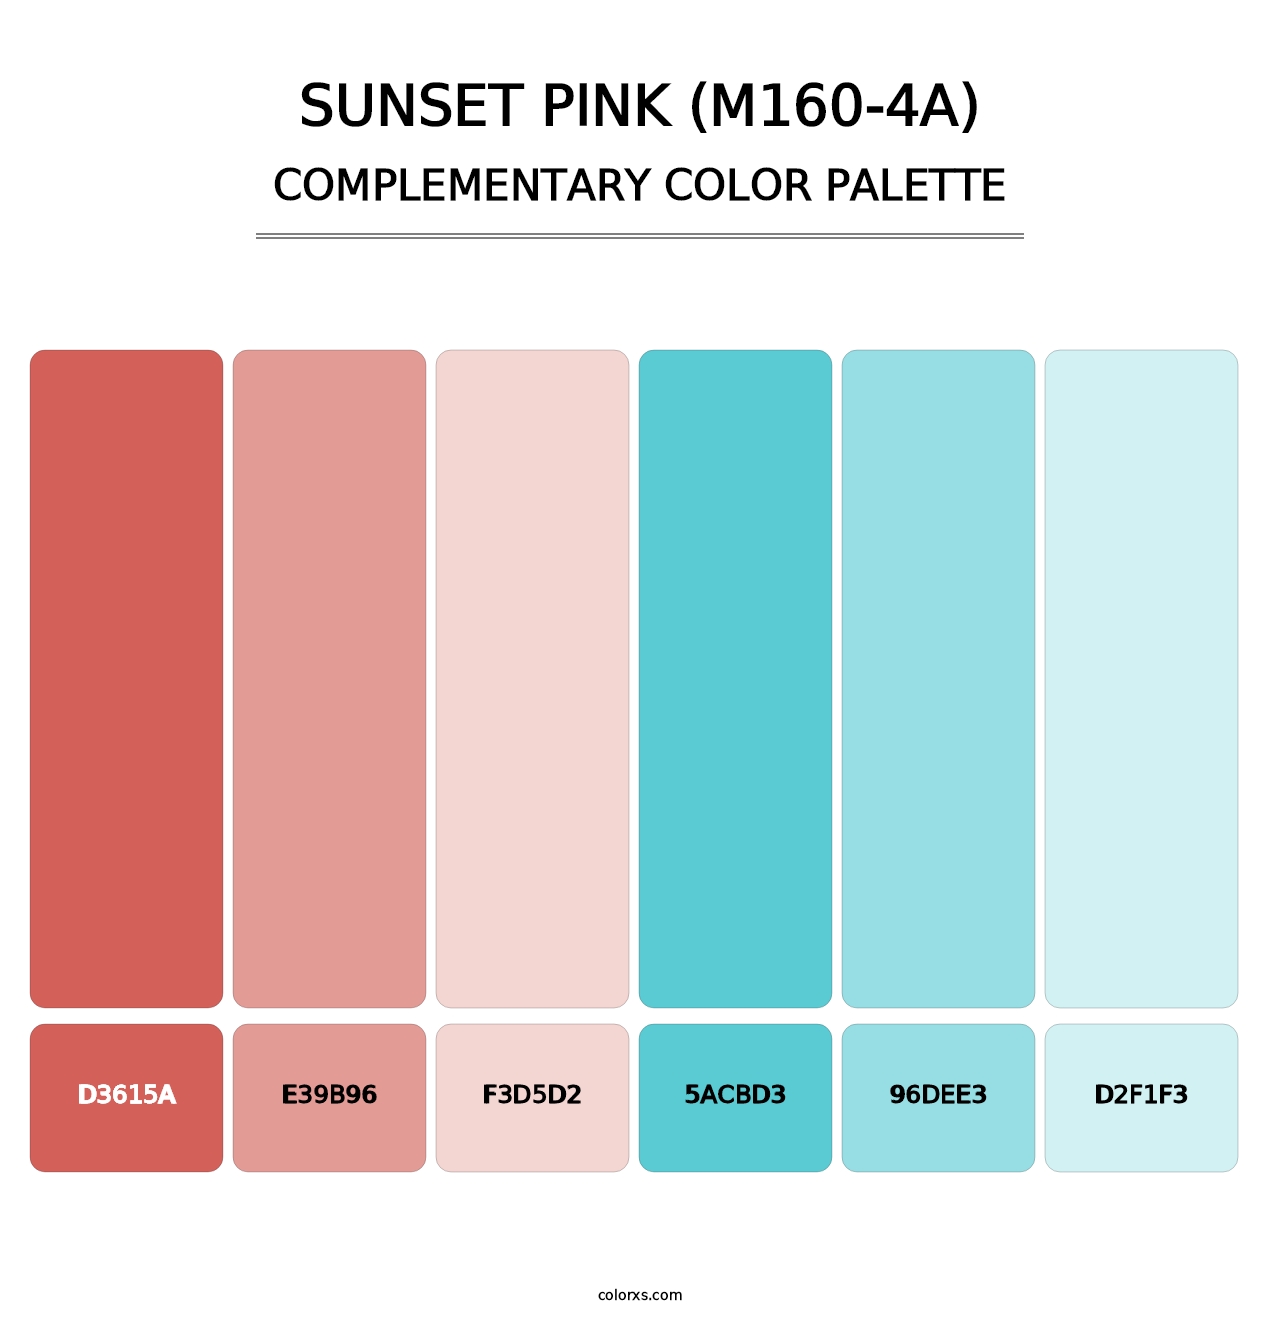 Sunset Pink (M160-4A) - Complementary Color Palette